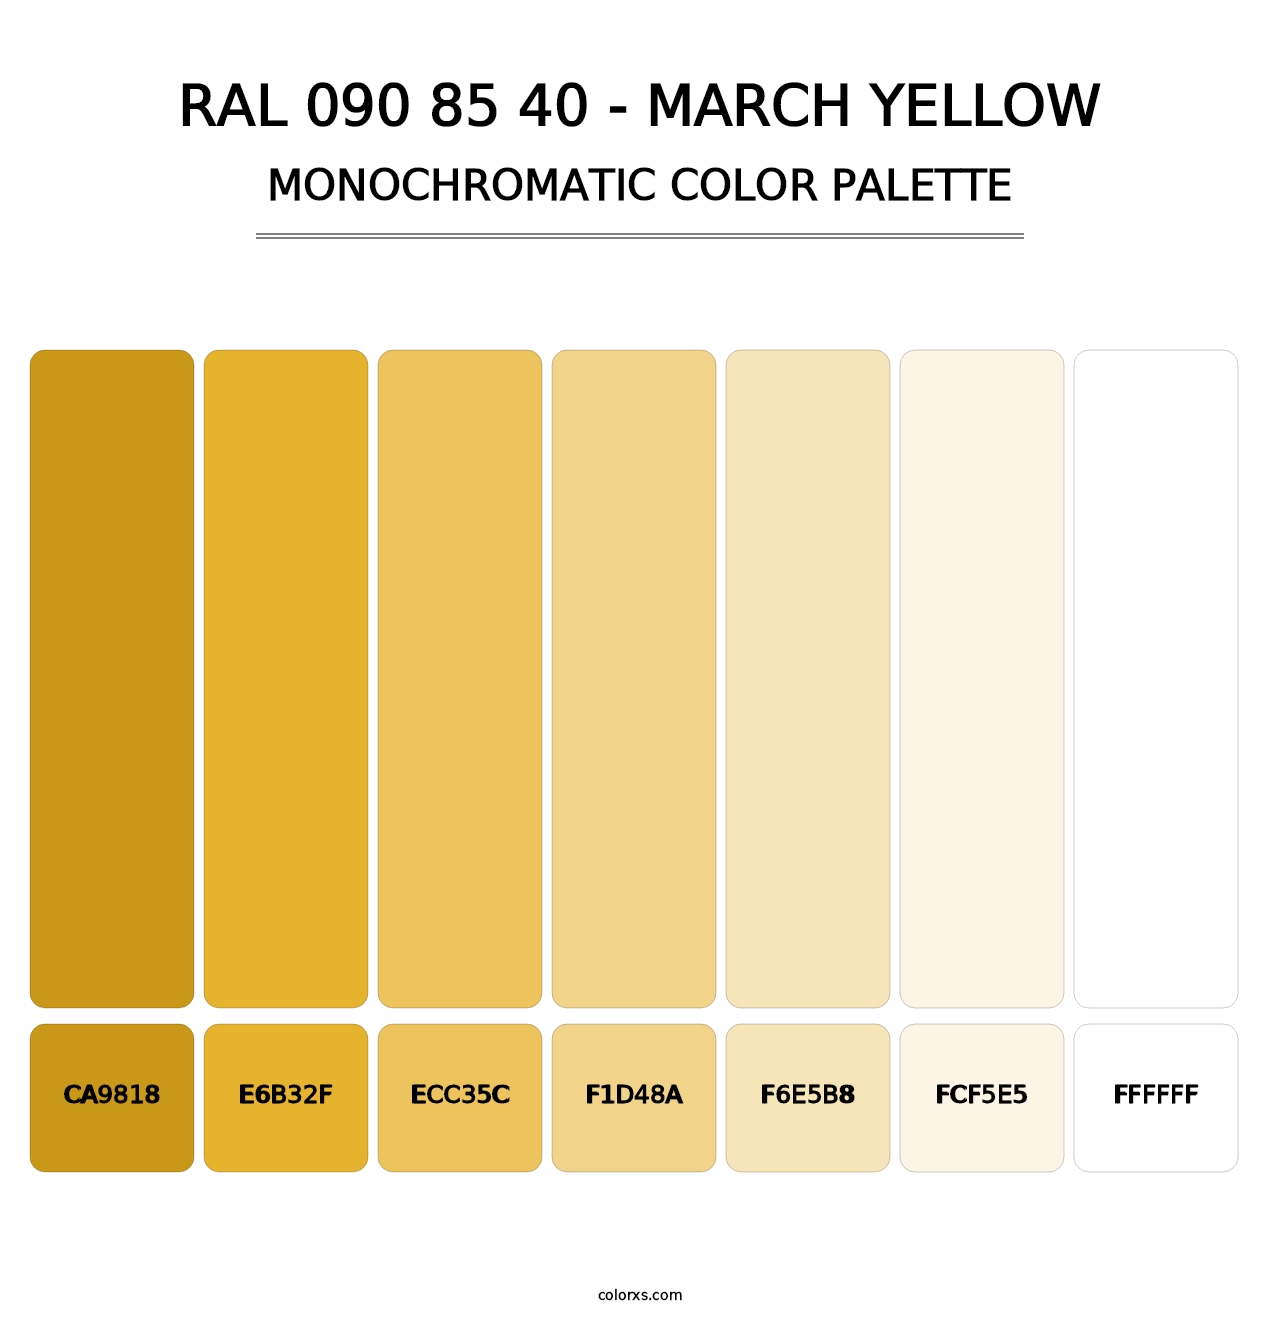 RAL 090 85 40 - March Yellow - Monochromatic Color Palette